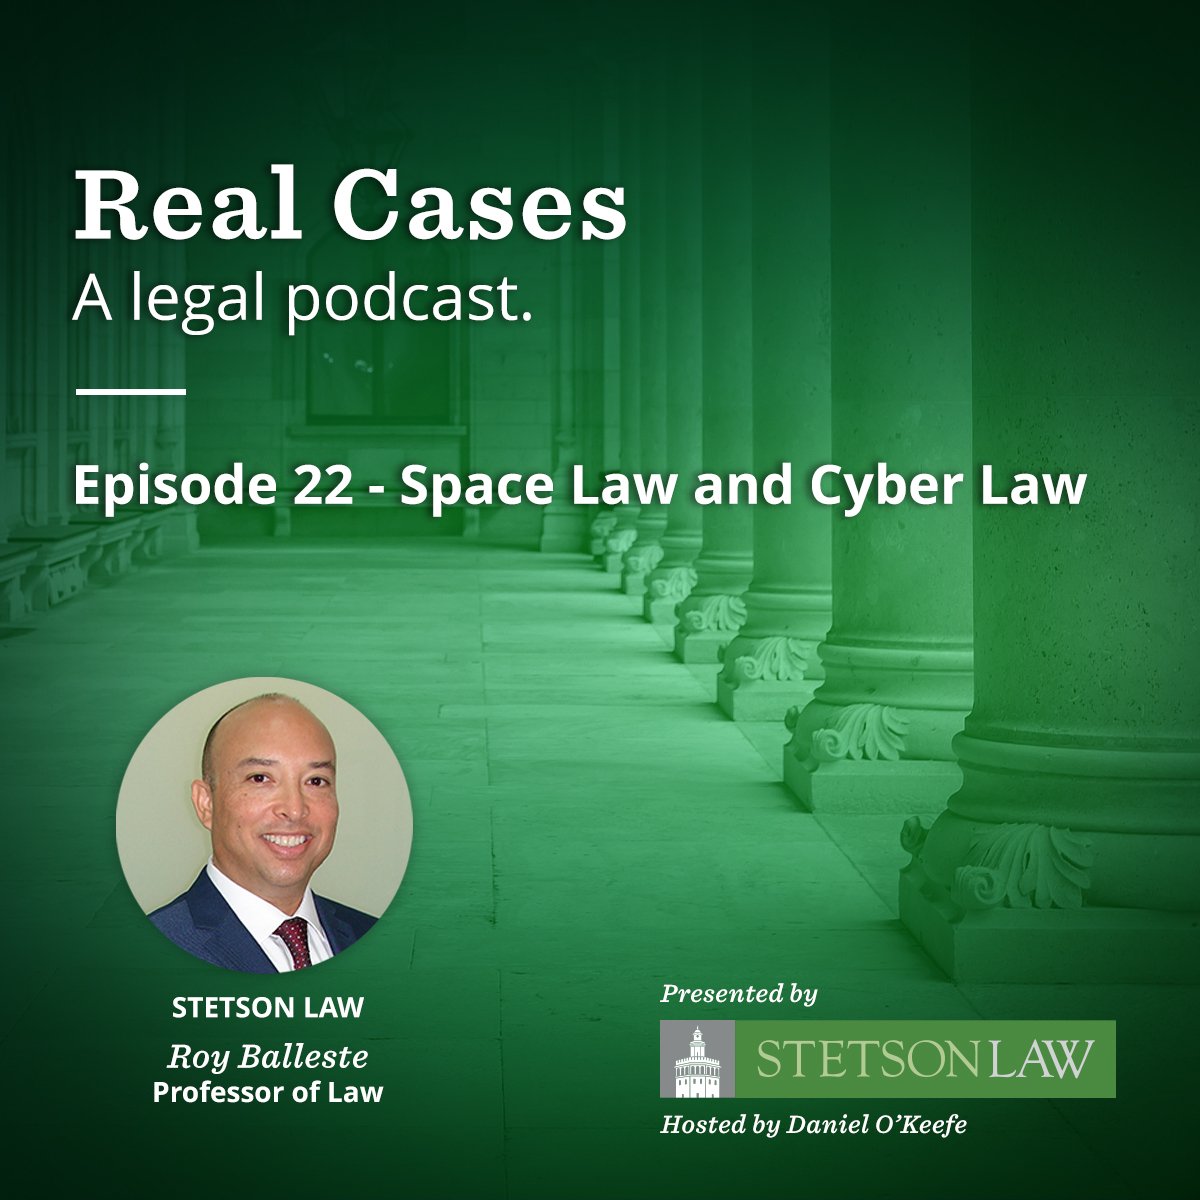 Real Cases - a legal podcast. Episode 22: Space Law and Cyber Law - Roy Balleste